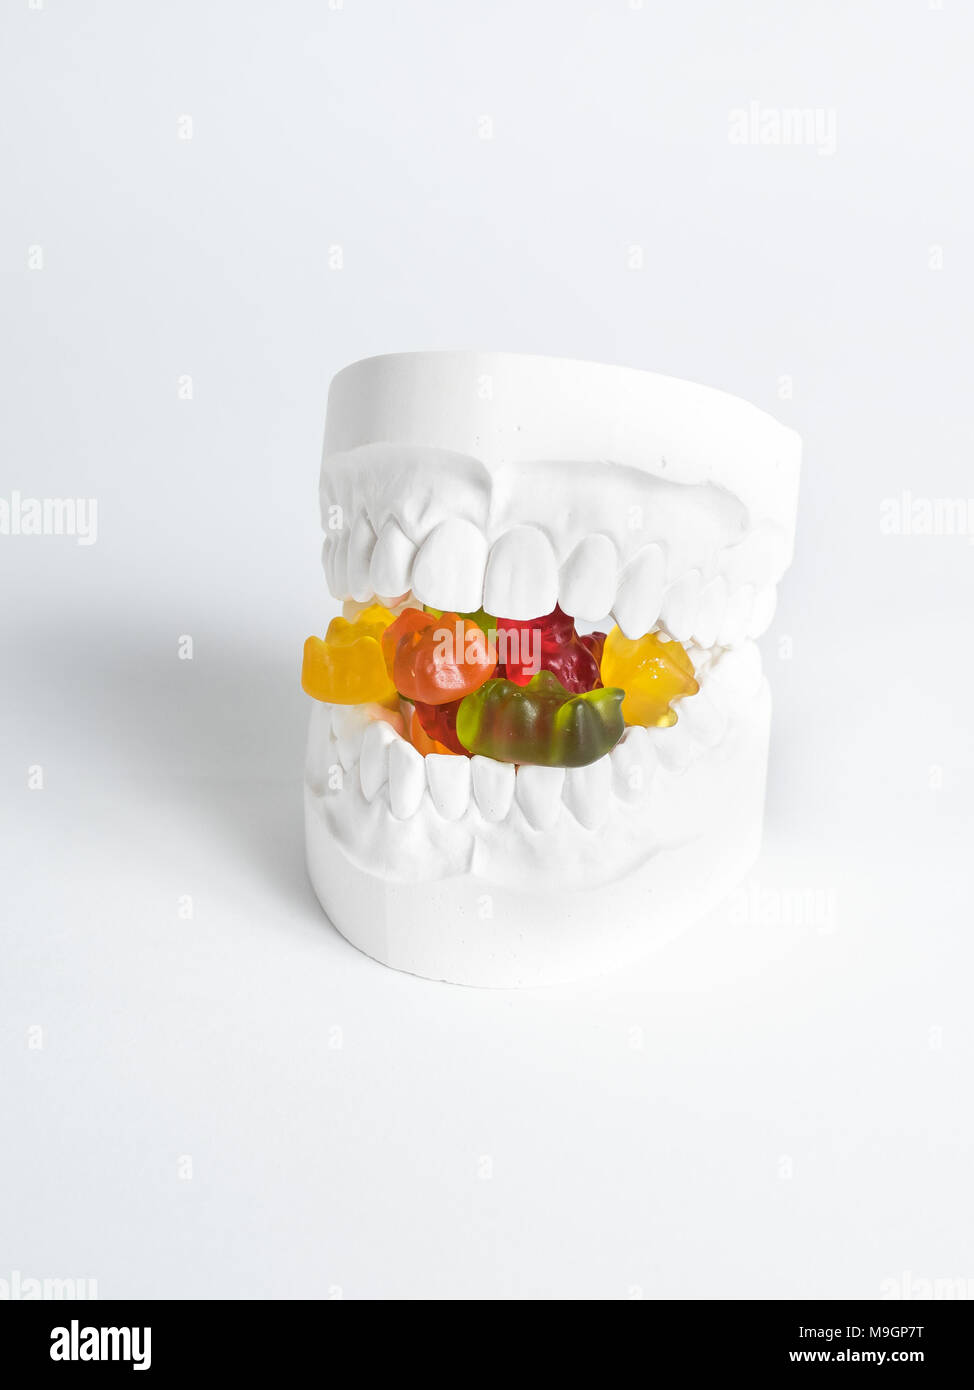 The plaster bit has gummy bears between its teeth against a white background Stock Photo